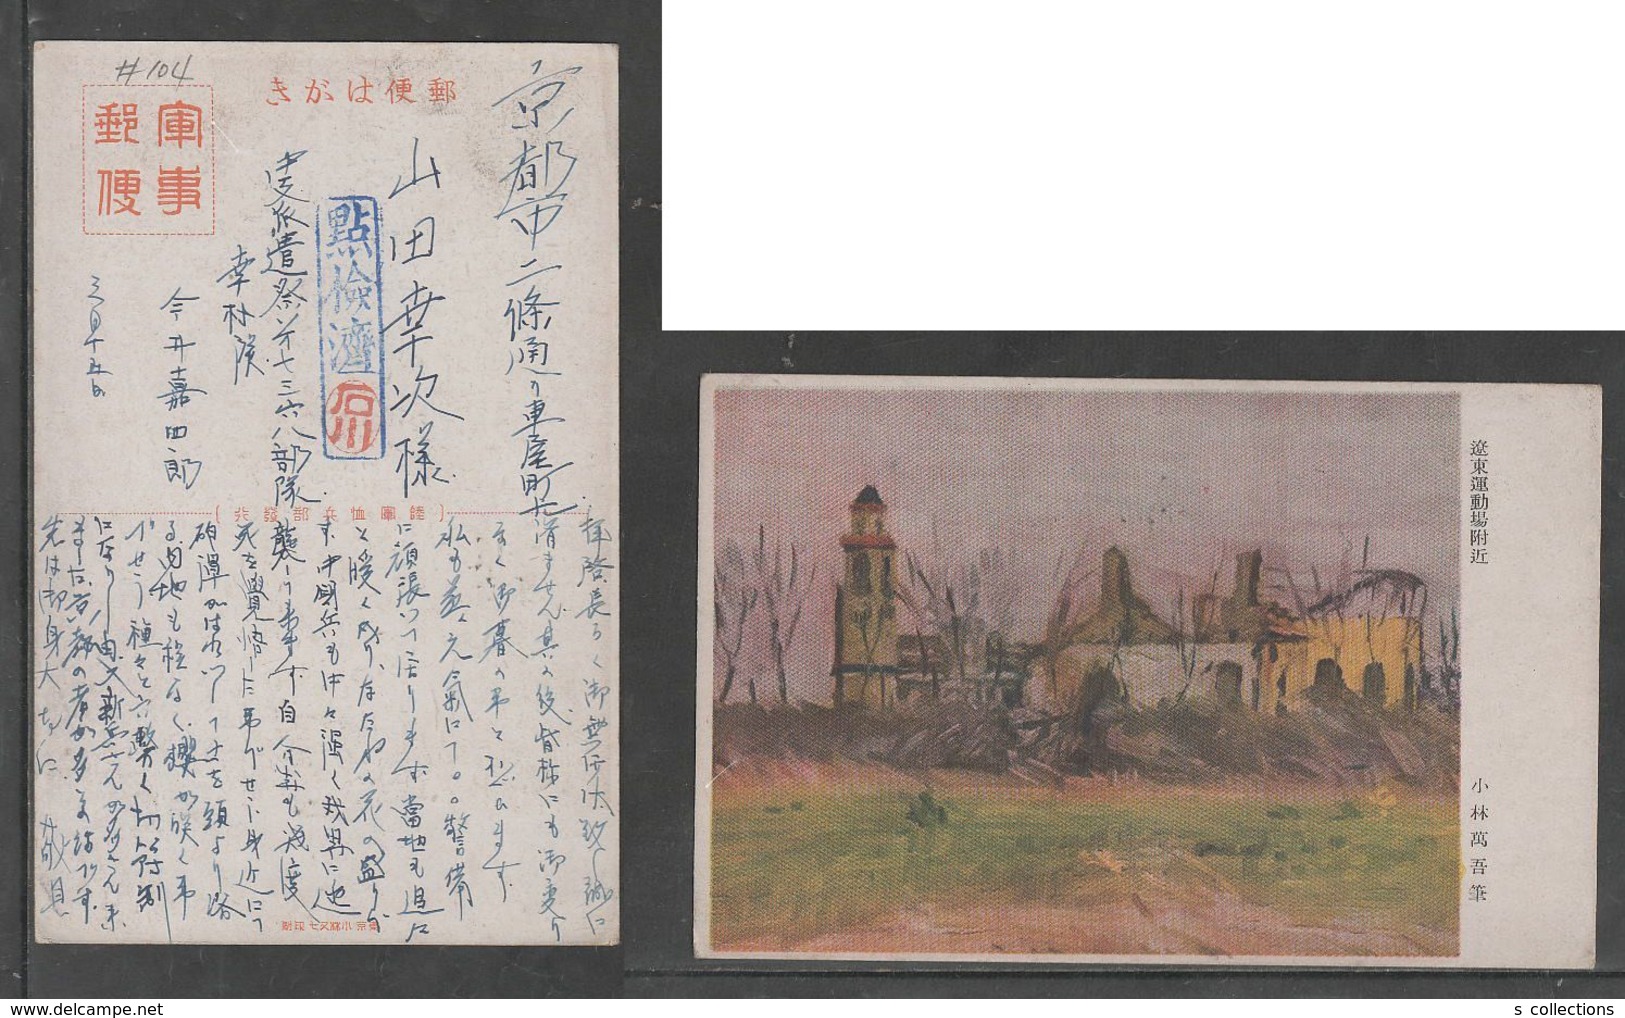 JAPAN WWII Military Liaodong Picture Postcard CENTRAL CHINA WW2 MANCHURIA CHINE MANDCHOUKOUO JAPON GIAPPONE - 1943-45 Shanghai & Nanjing